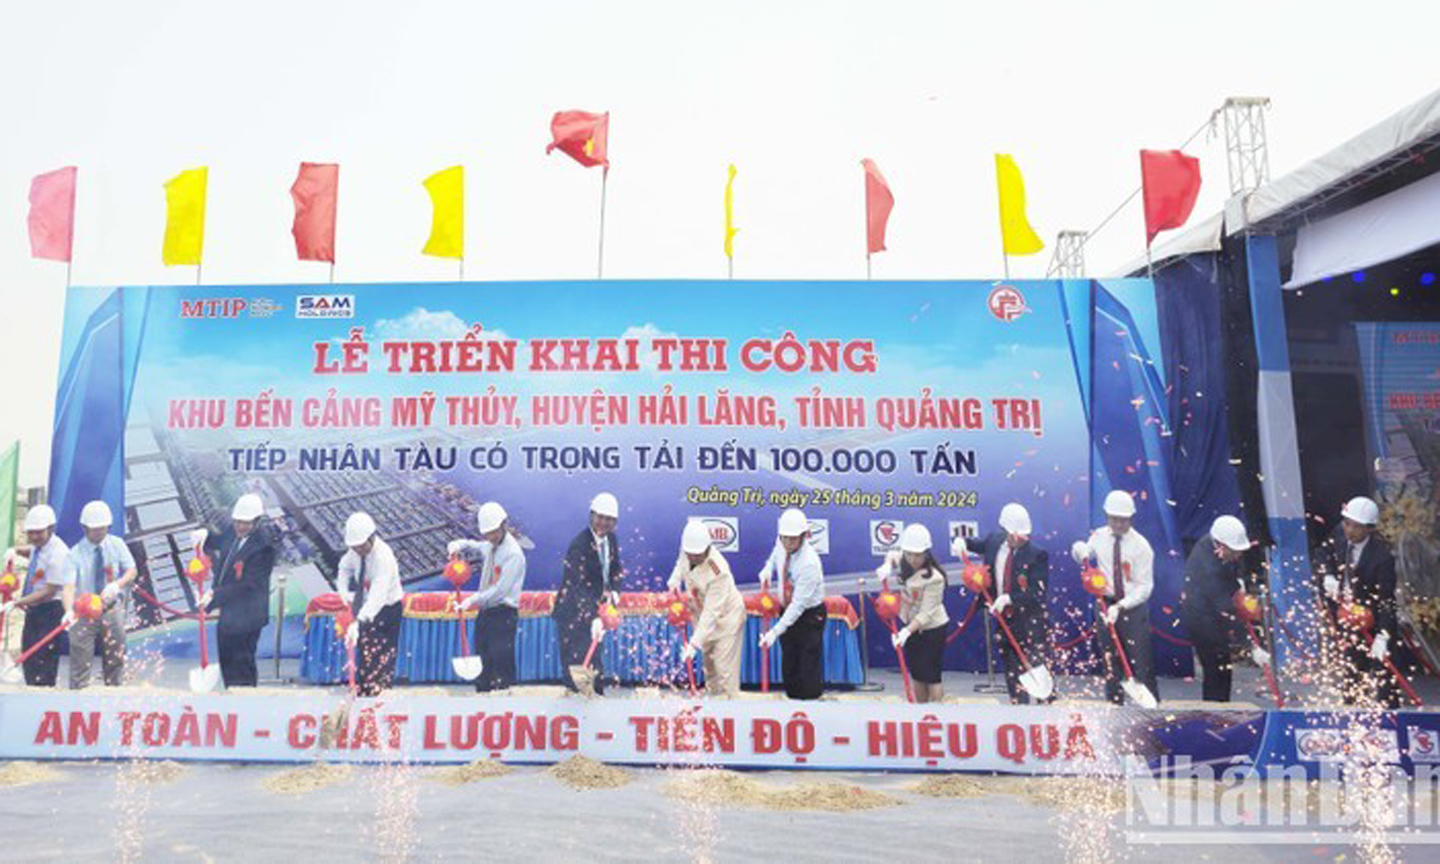 ABO/NDO- On March 25, the central province of Quang Tri launched the construction of My Thuy Port located in the Quang Tri Southeast Economic Zone in Hai An Commune, Hai Lang District.